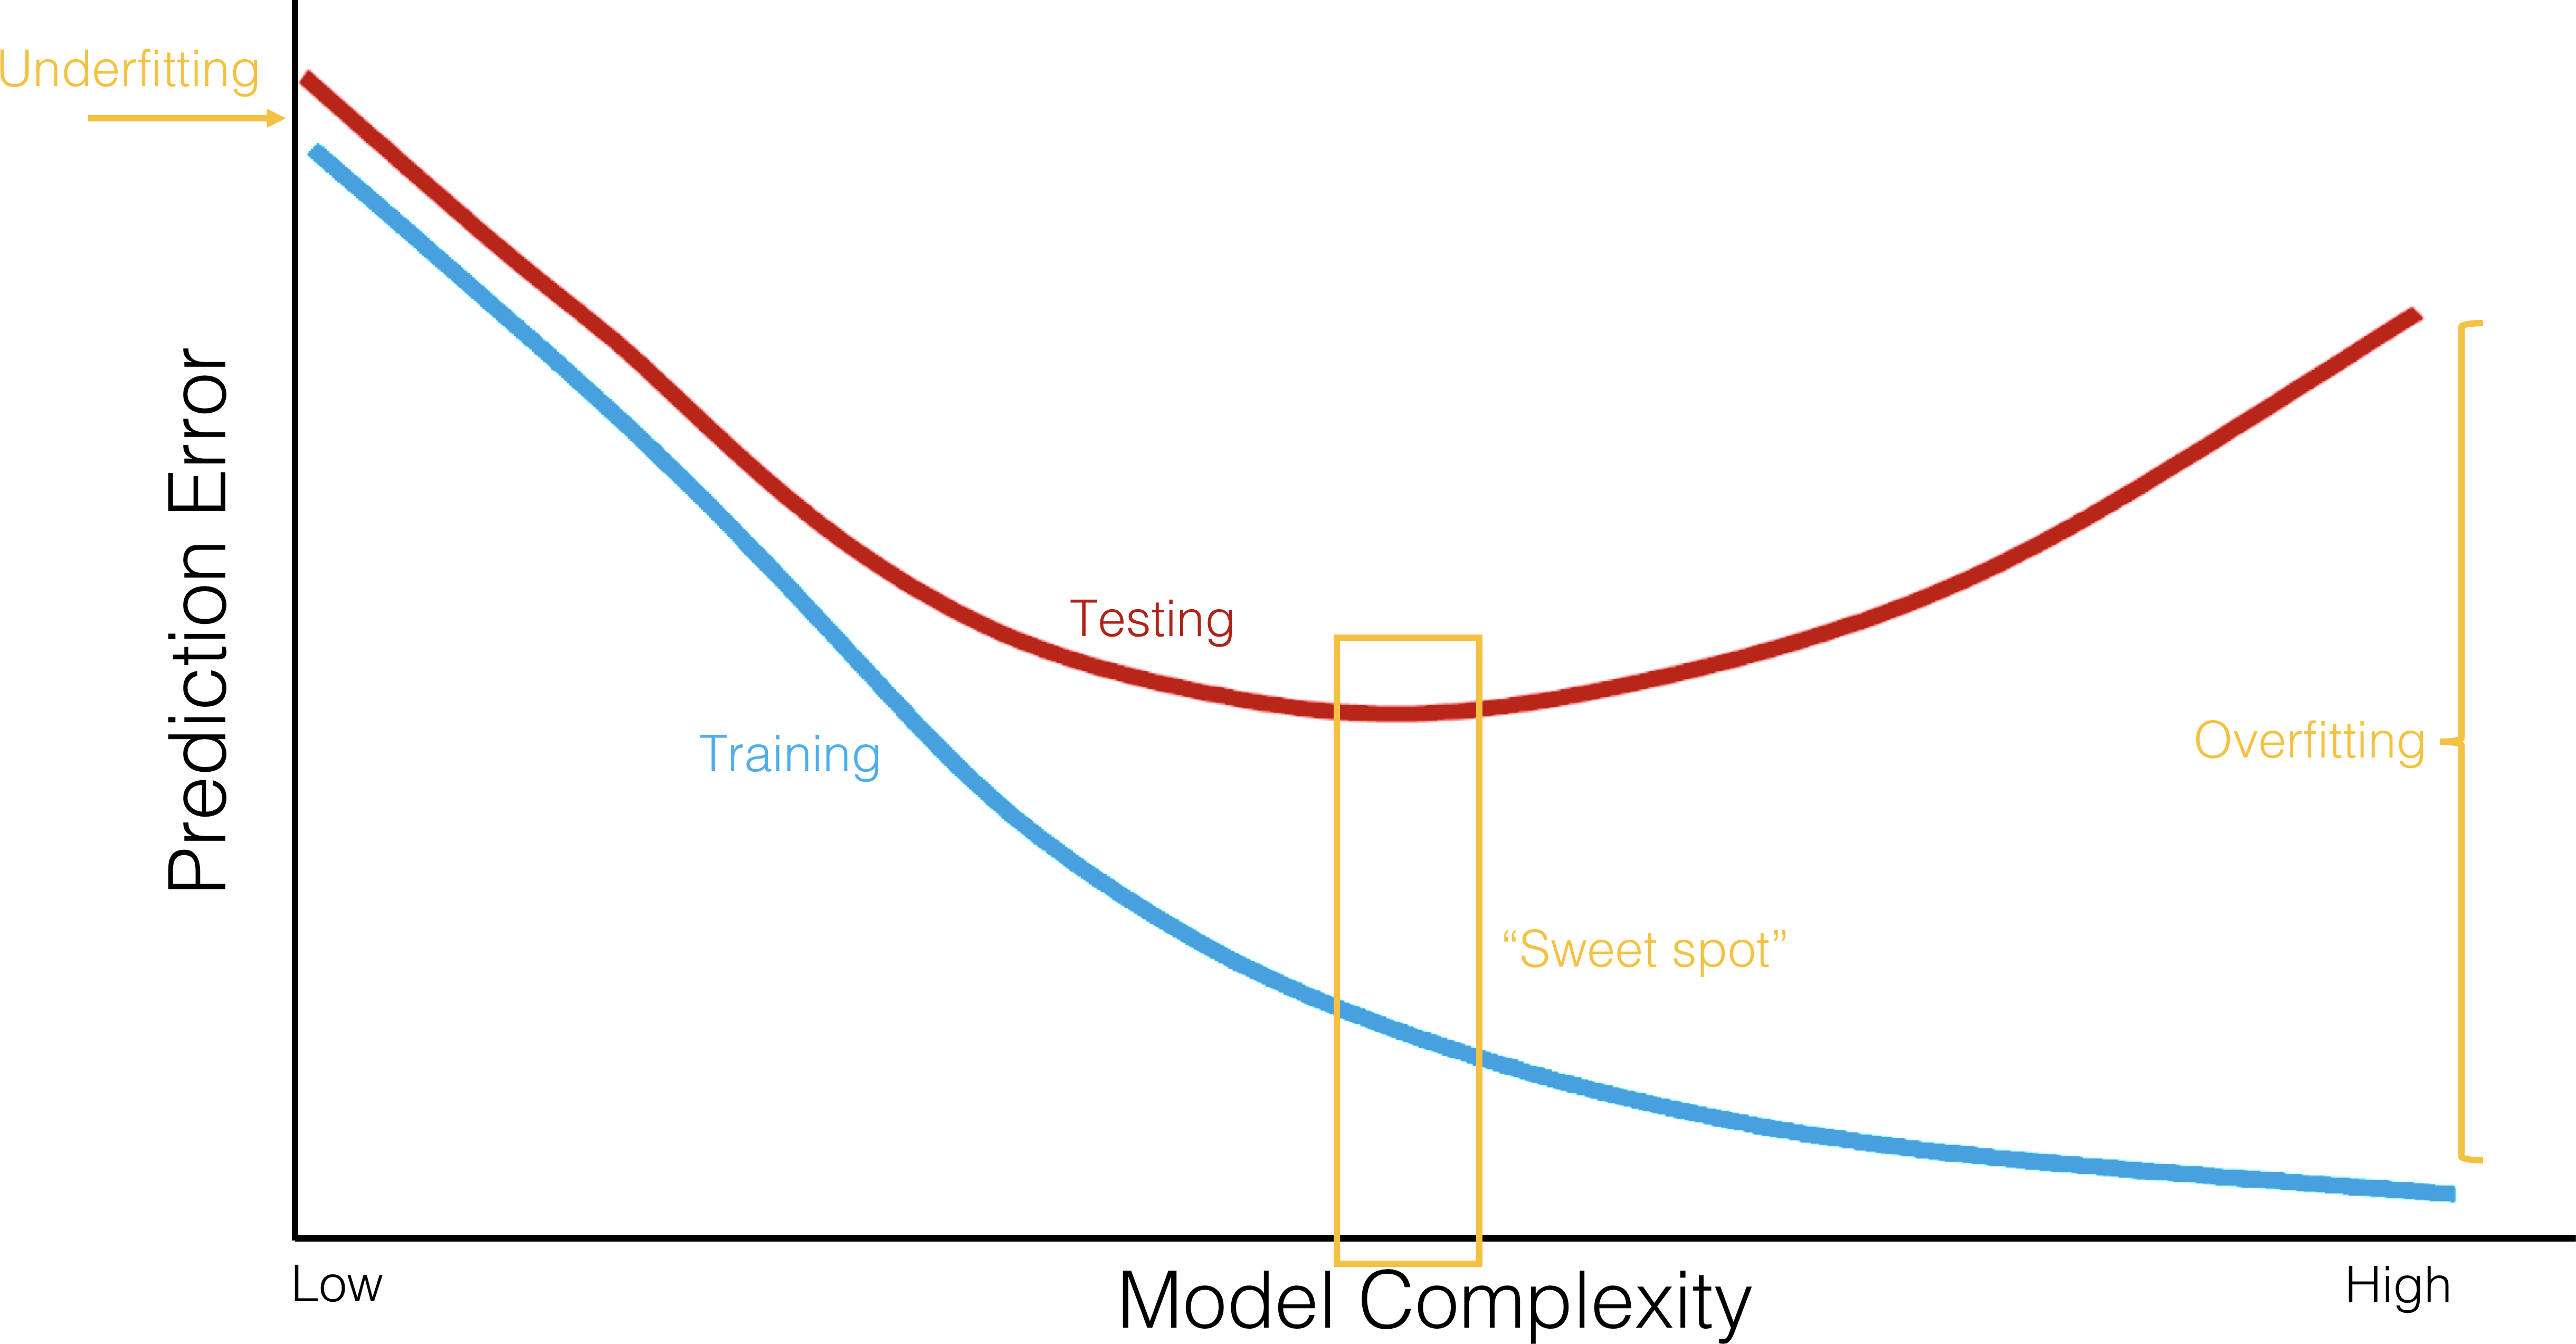 nderfitting and overfitting as a function of model complexity; error prediction on training sample and testing sample.